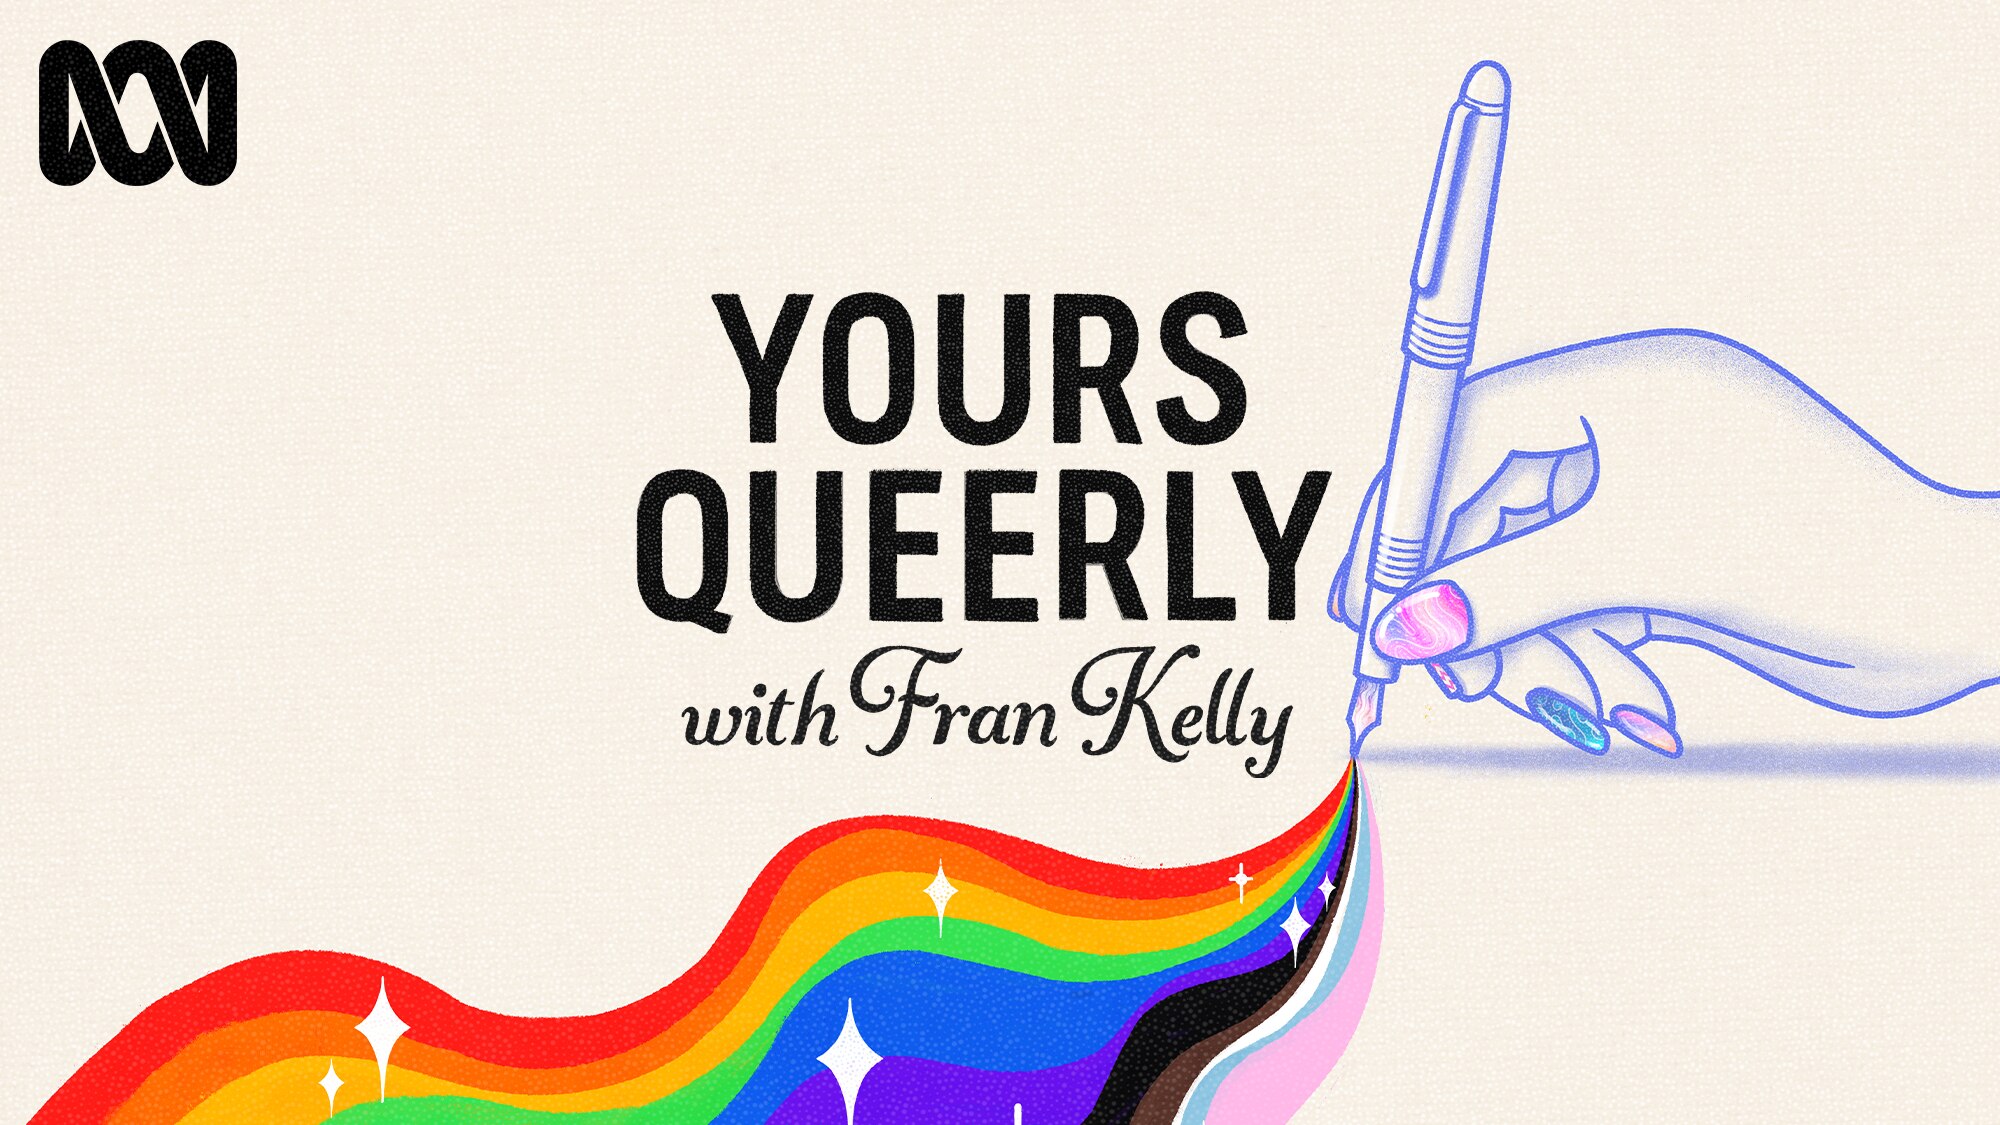 INTRODUCING Yours Queerly